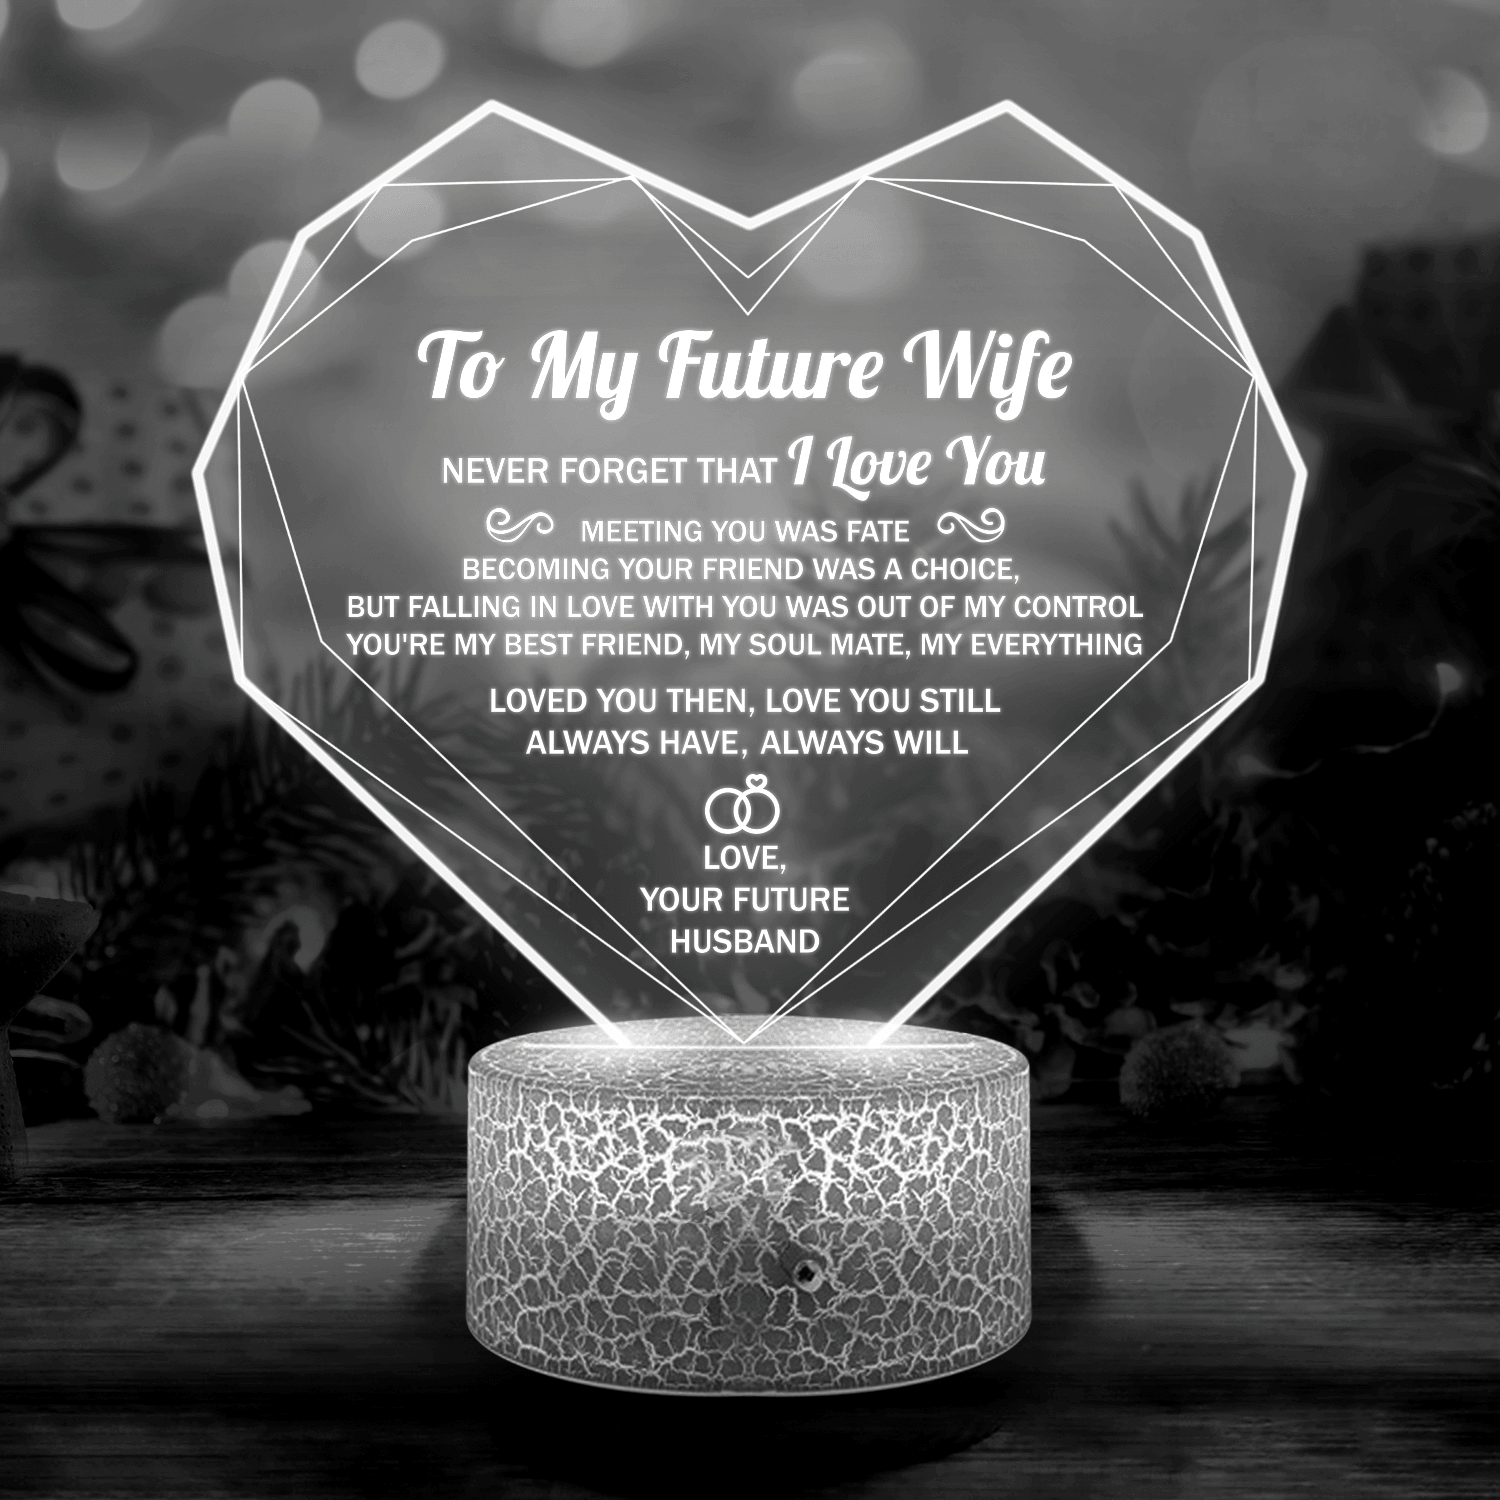 Personalised Heart Led Light - Family - To My Future Wife - You're My Best Friend, My Soulmate, My Everything - Auglca25003 - Gifts Holder